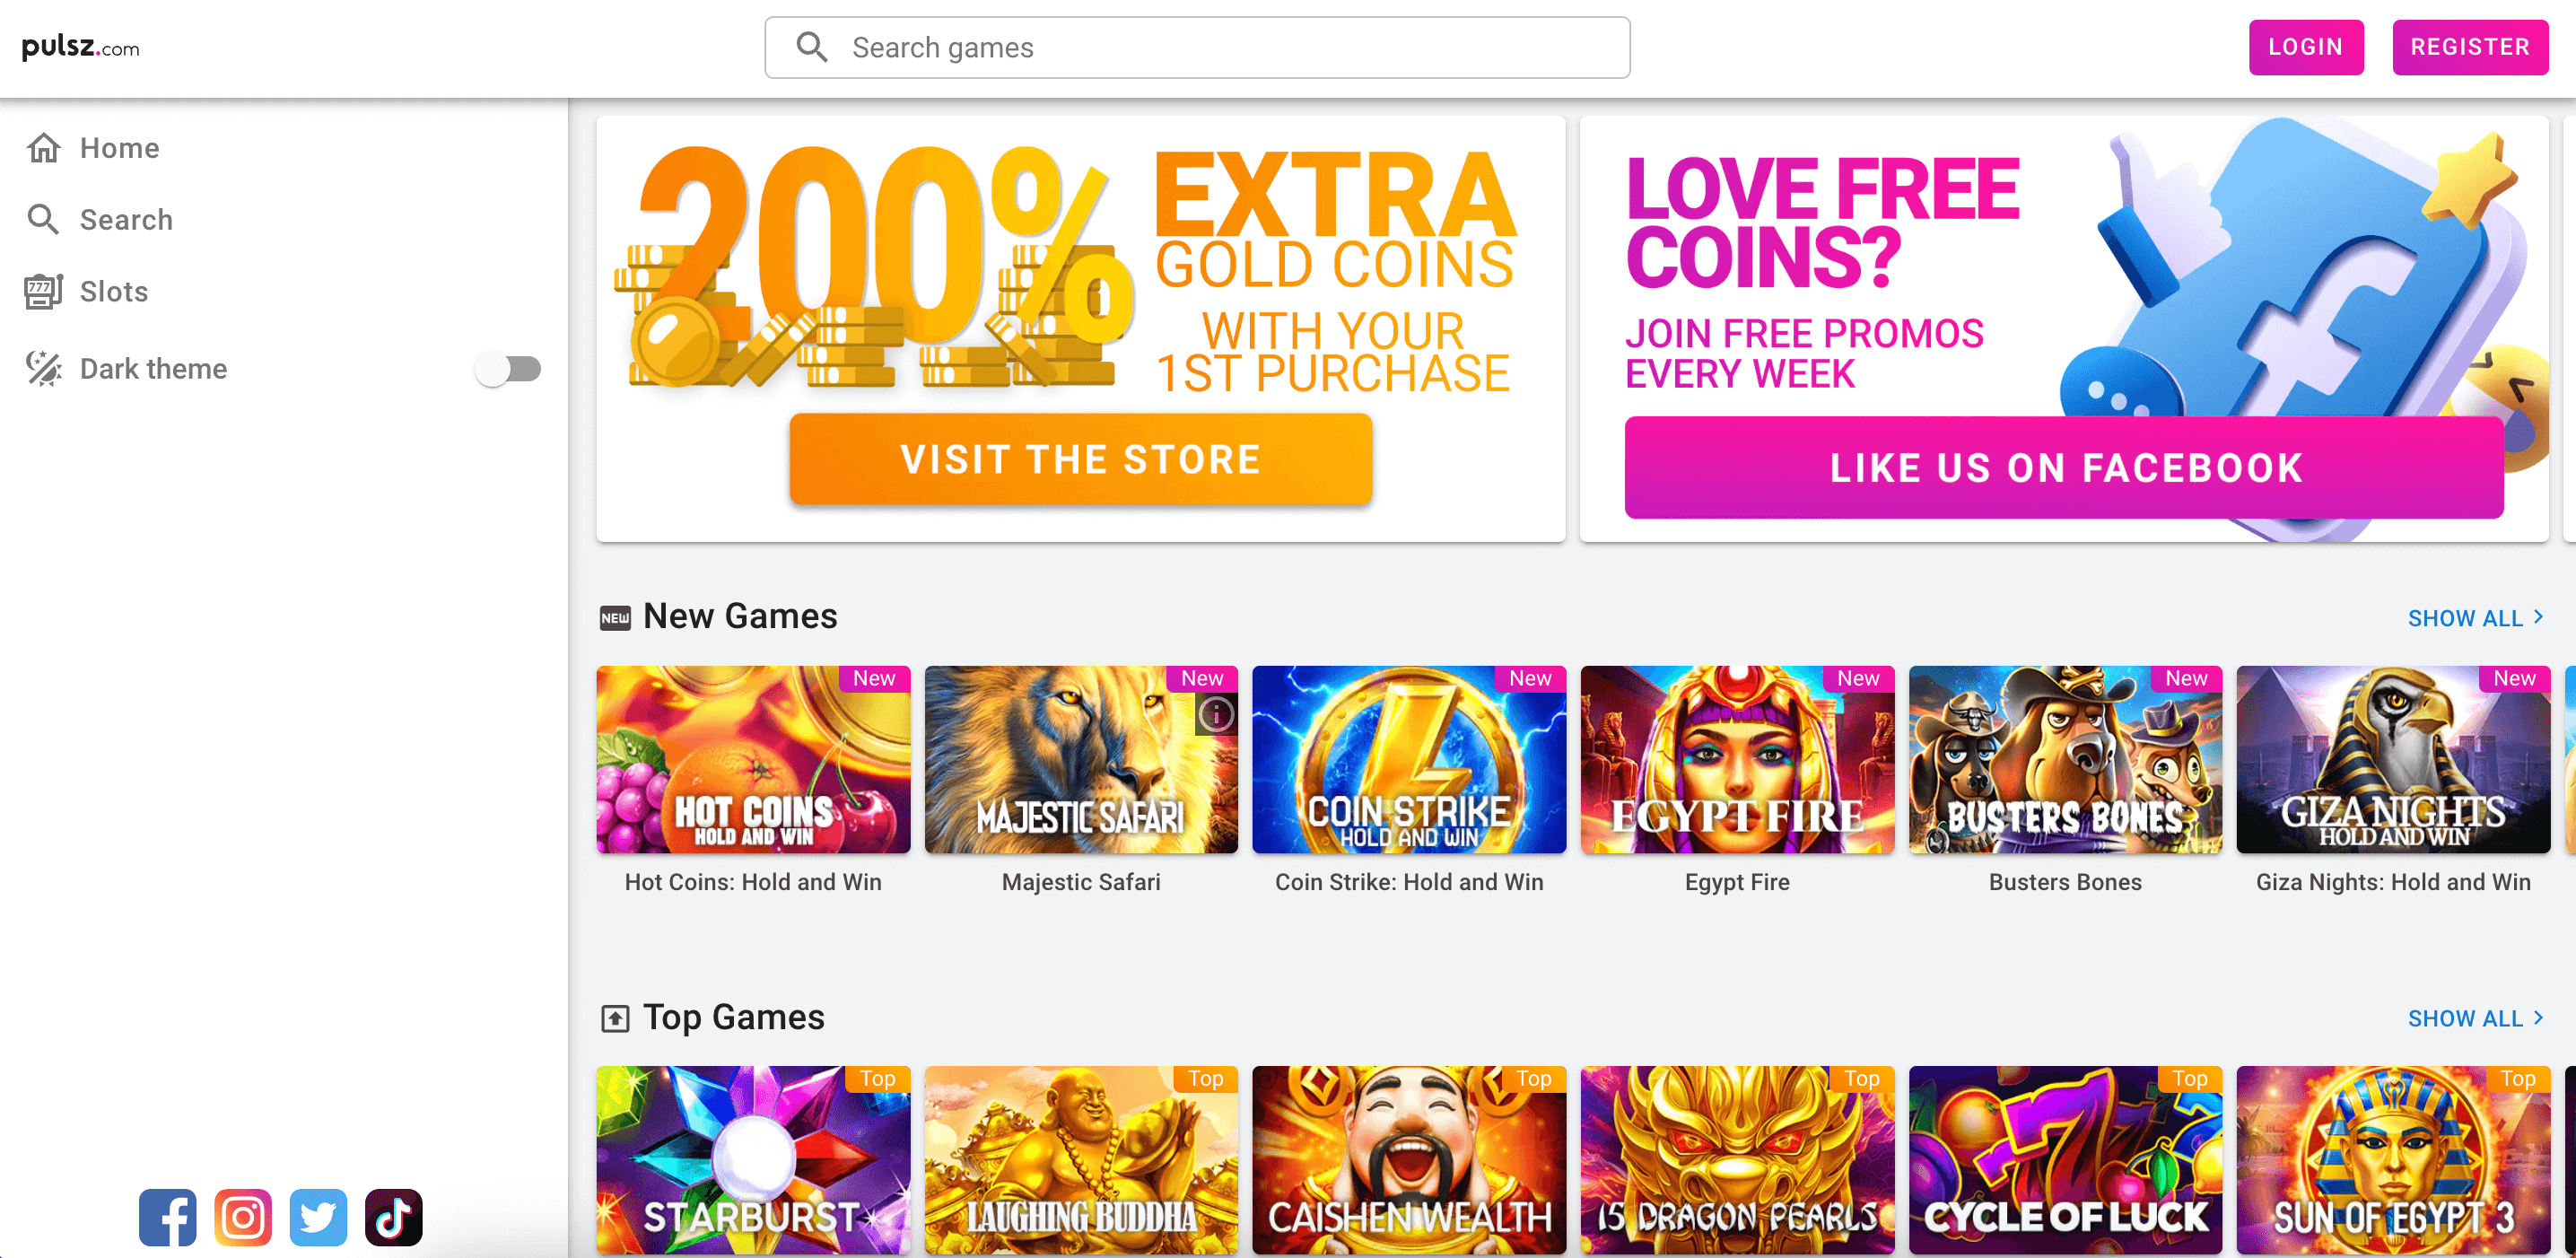 Pulsz Social Casino Home Page